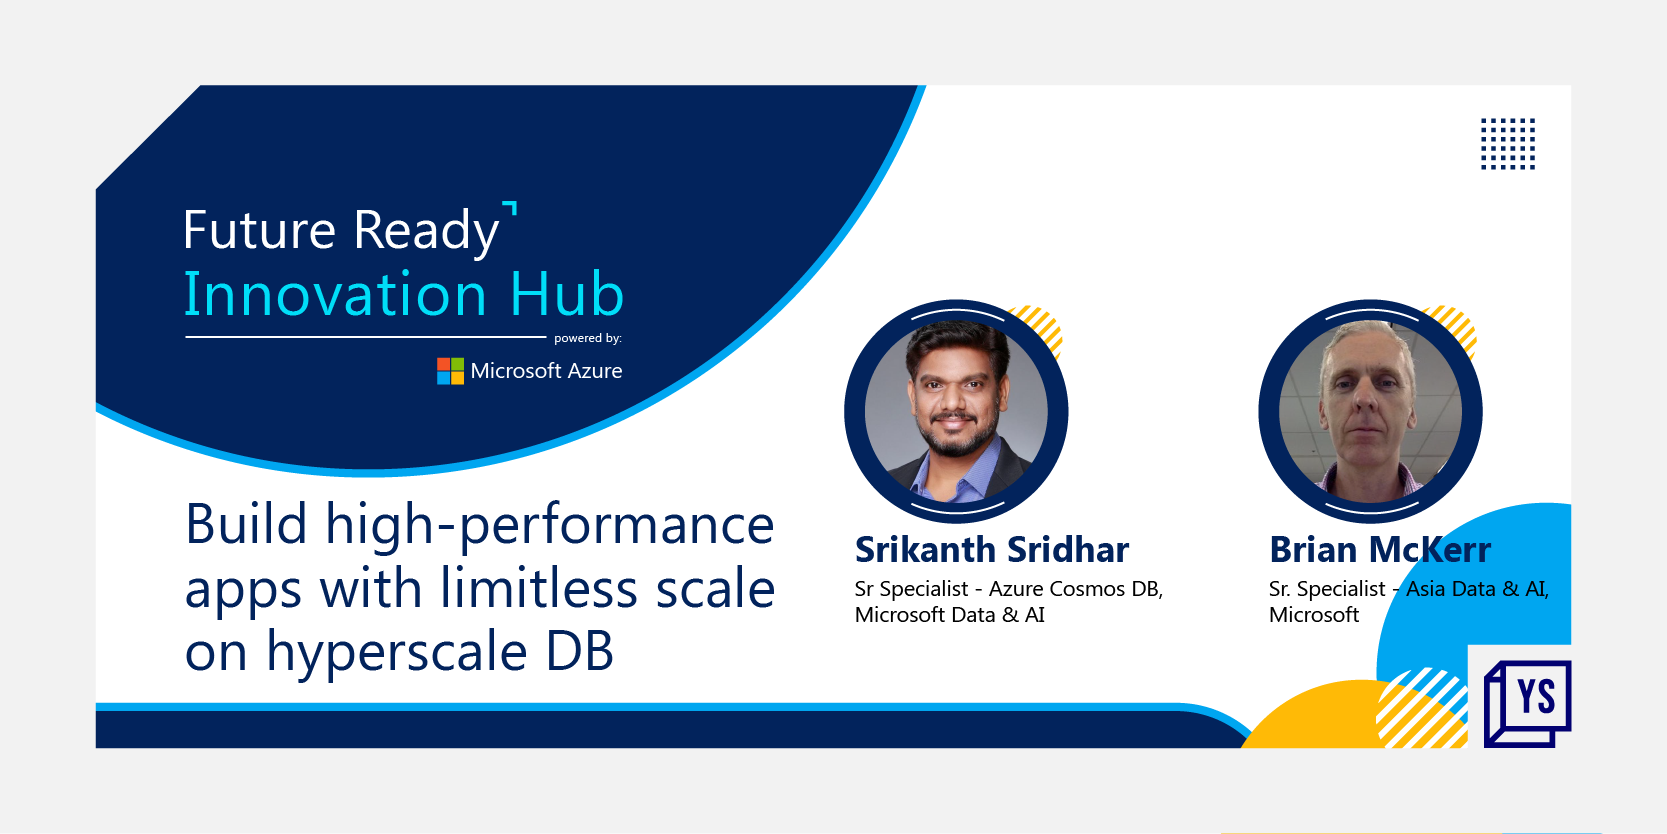 Learn all about scaling for your Azure database workloads with Hyperscale at Microsoft’s upcoming webinar

